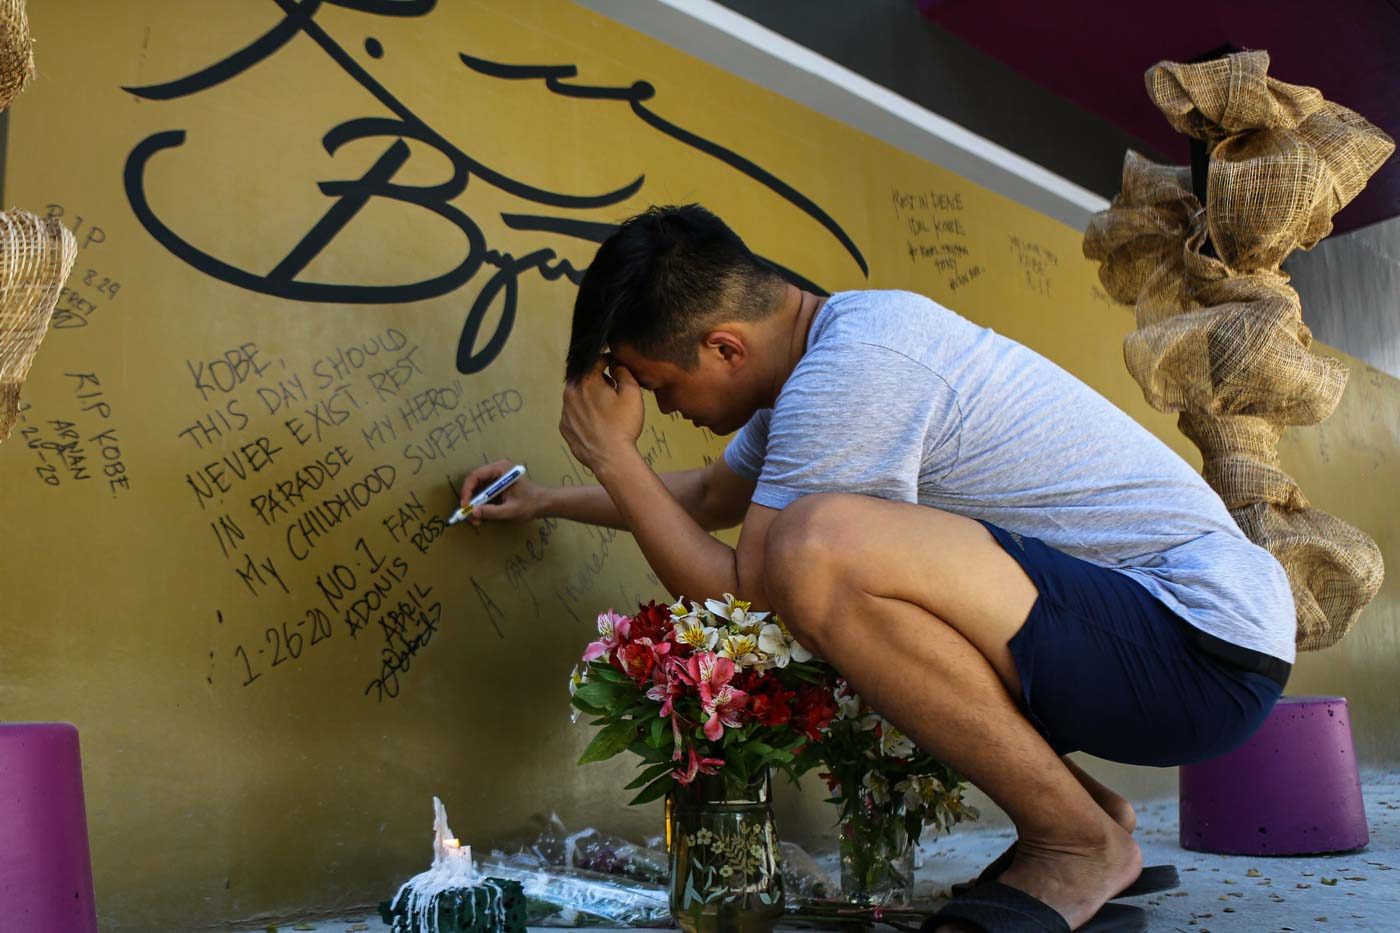 REMEMBERING KOBE. A man turns emotional while he writes his message to Kobe Bryant –his childhood superhero. Photo by Jire Carreon/Rappler 